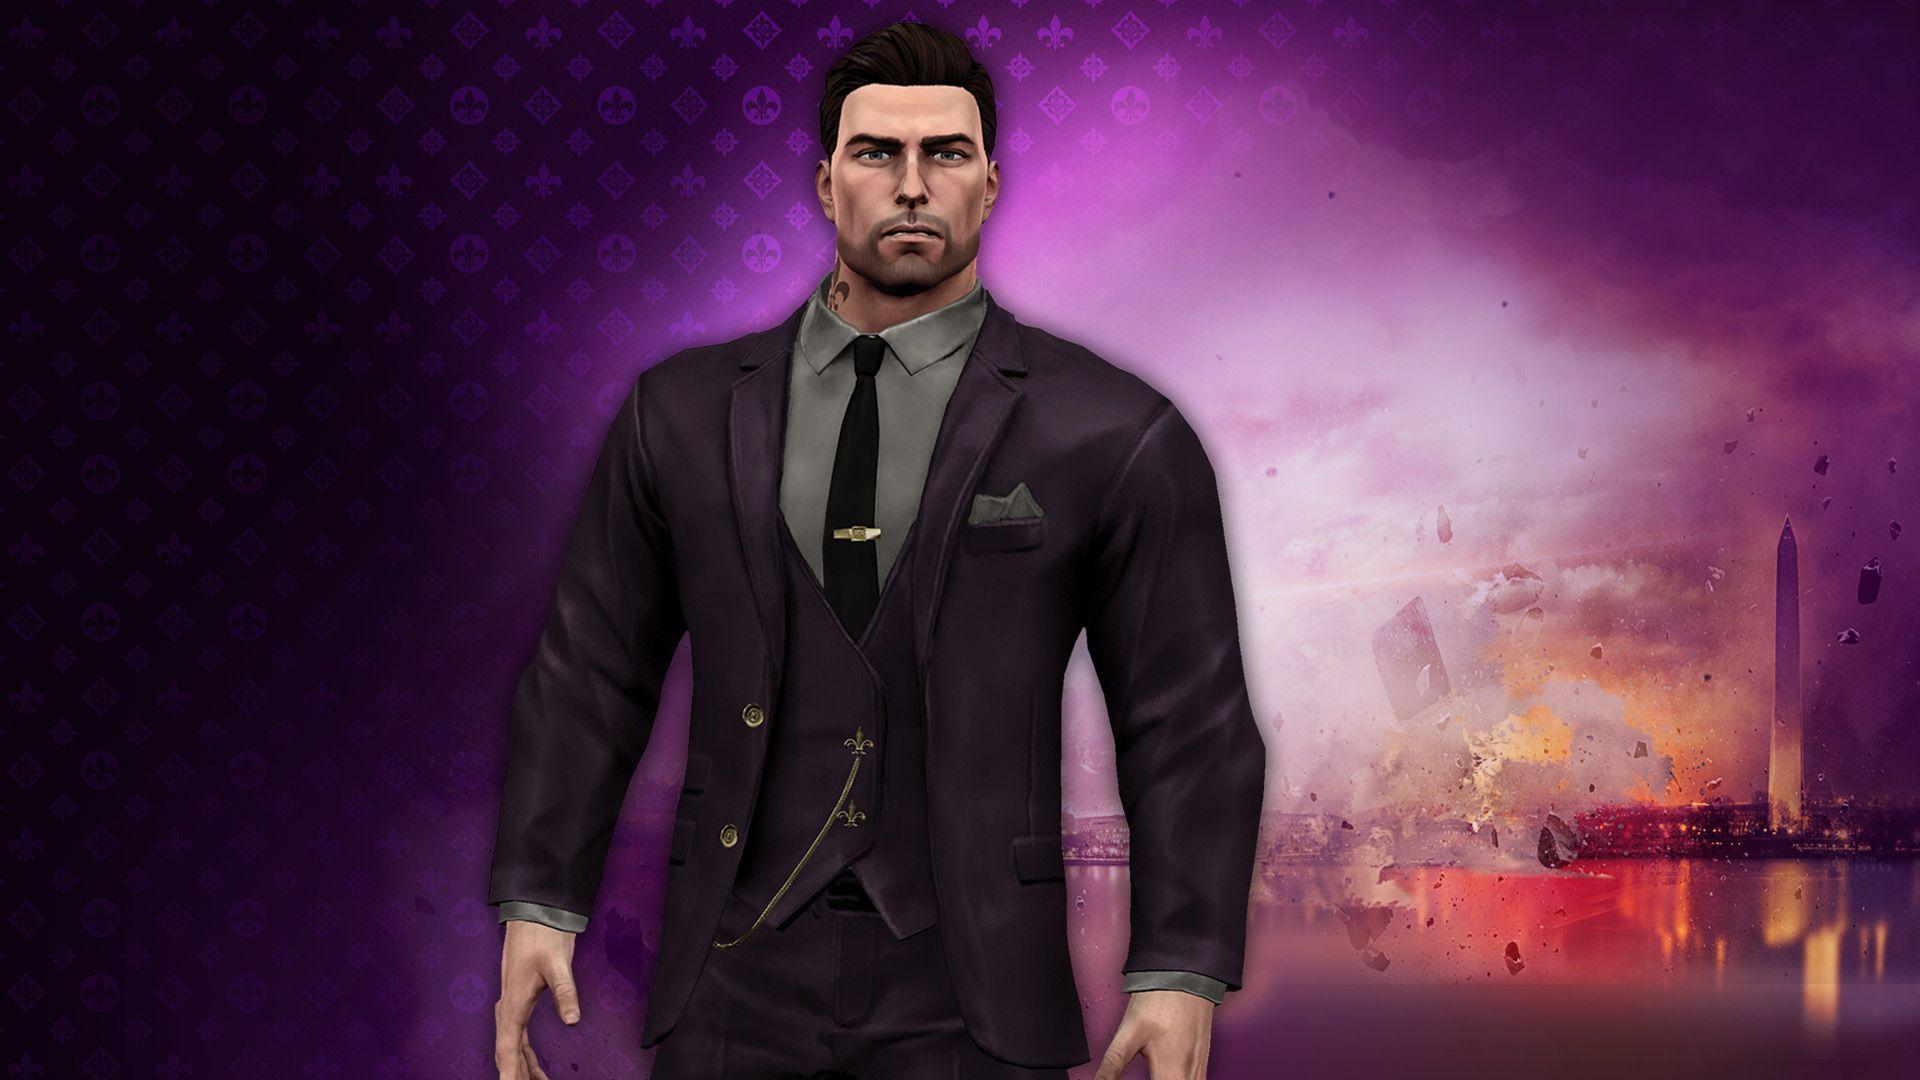 Does anybody fancy some Saints Row IV wallpaper?